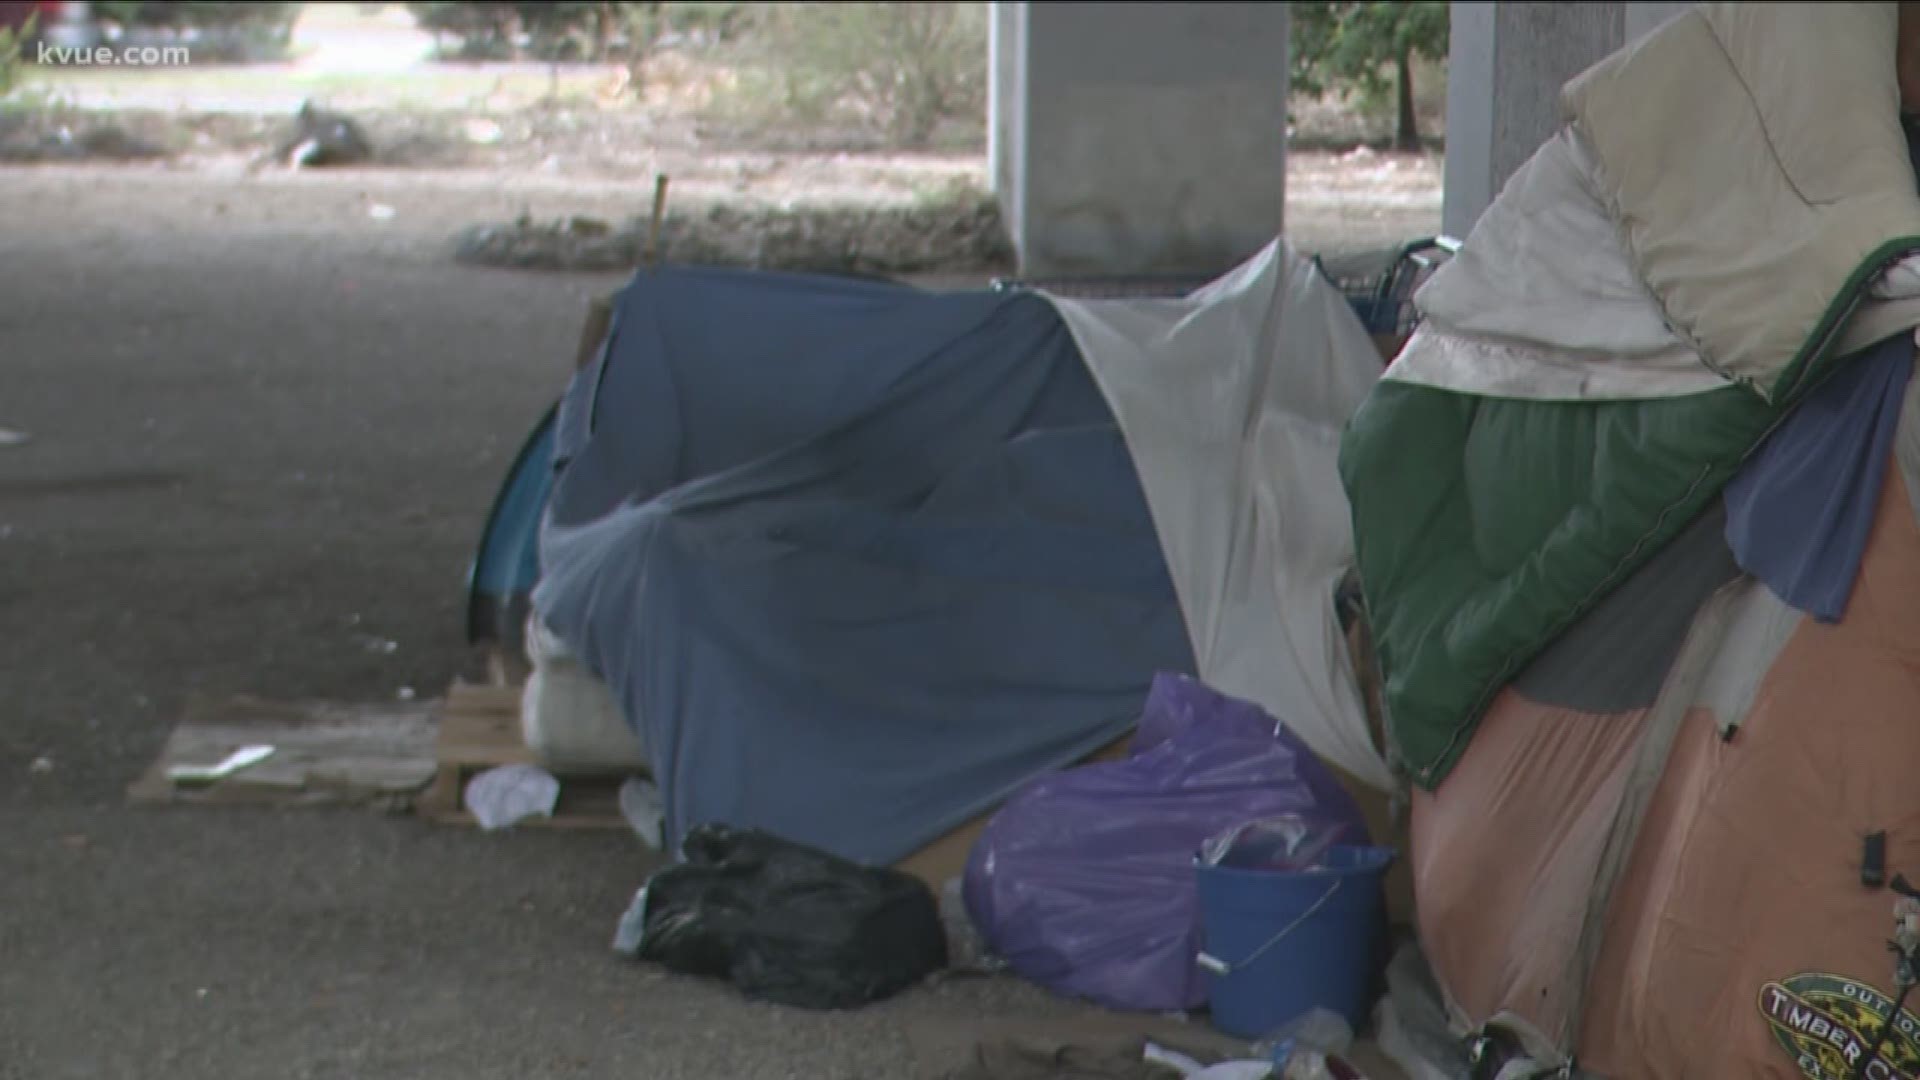 The plan to deal with Austin's homeless situation has many people living on the streets confused.